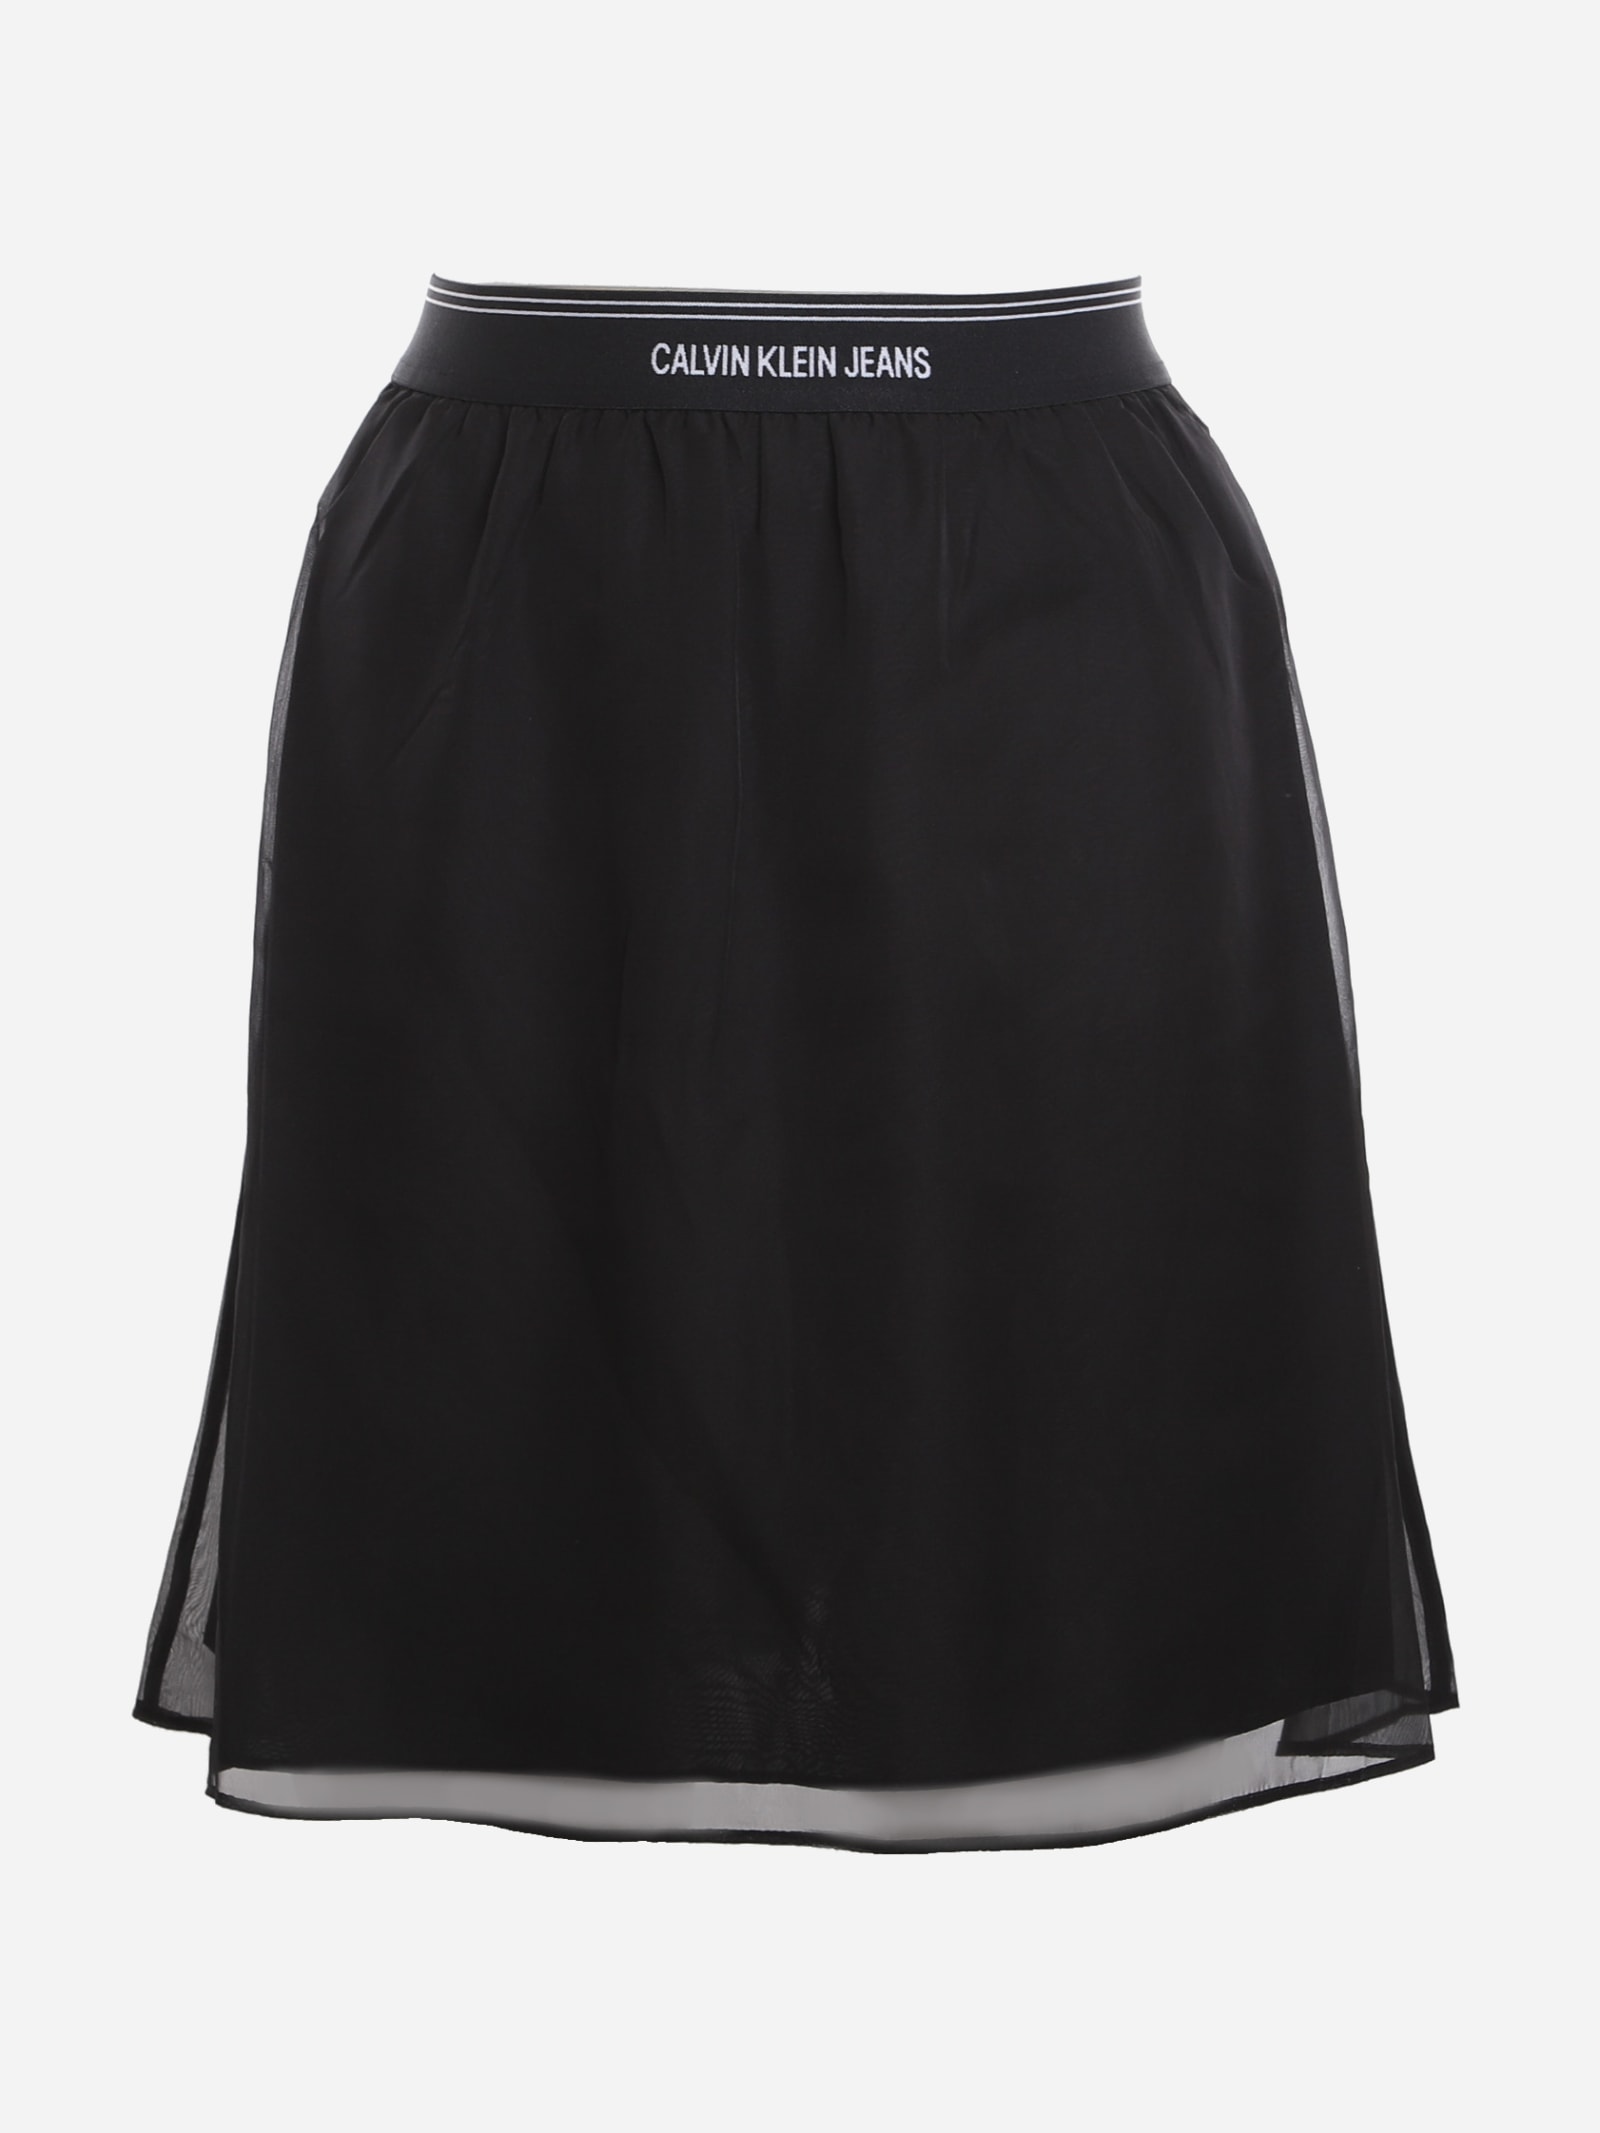 Calvin Klein Jeans Skirt Made Of Draped Chiffon With Logo Print